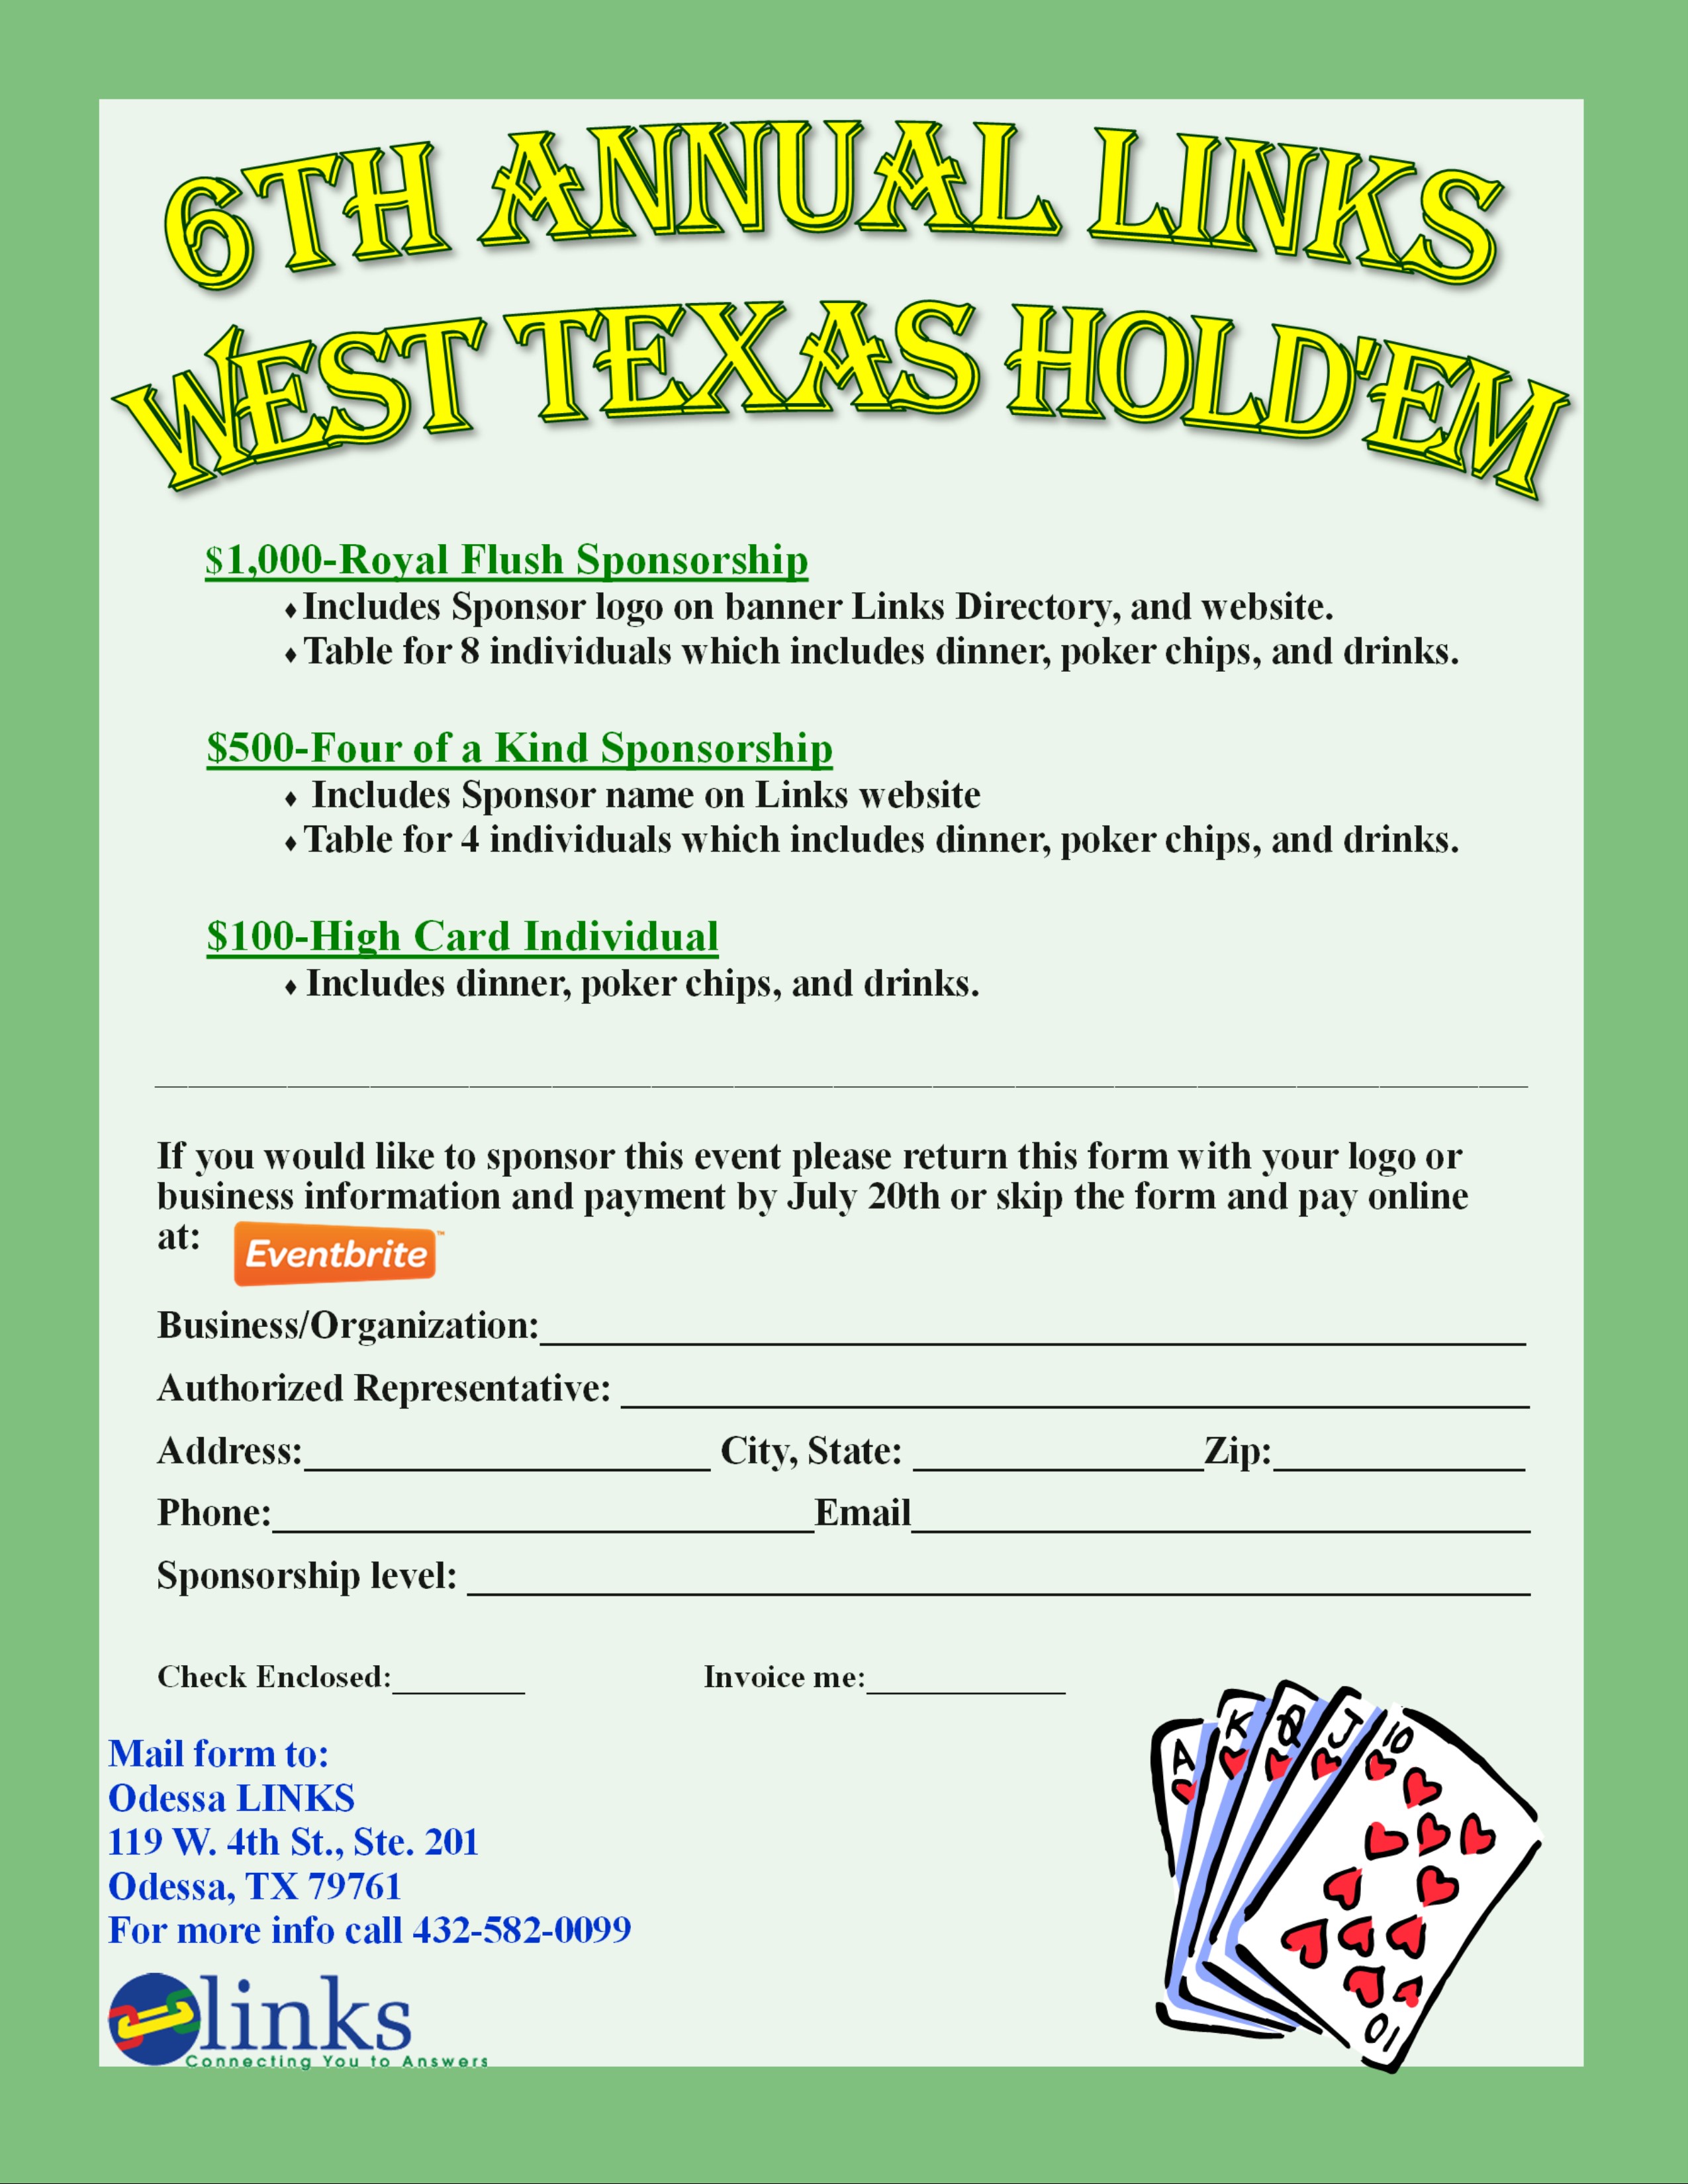 6th Annual Links West Texas Hold 'Em